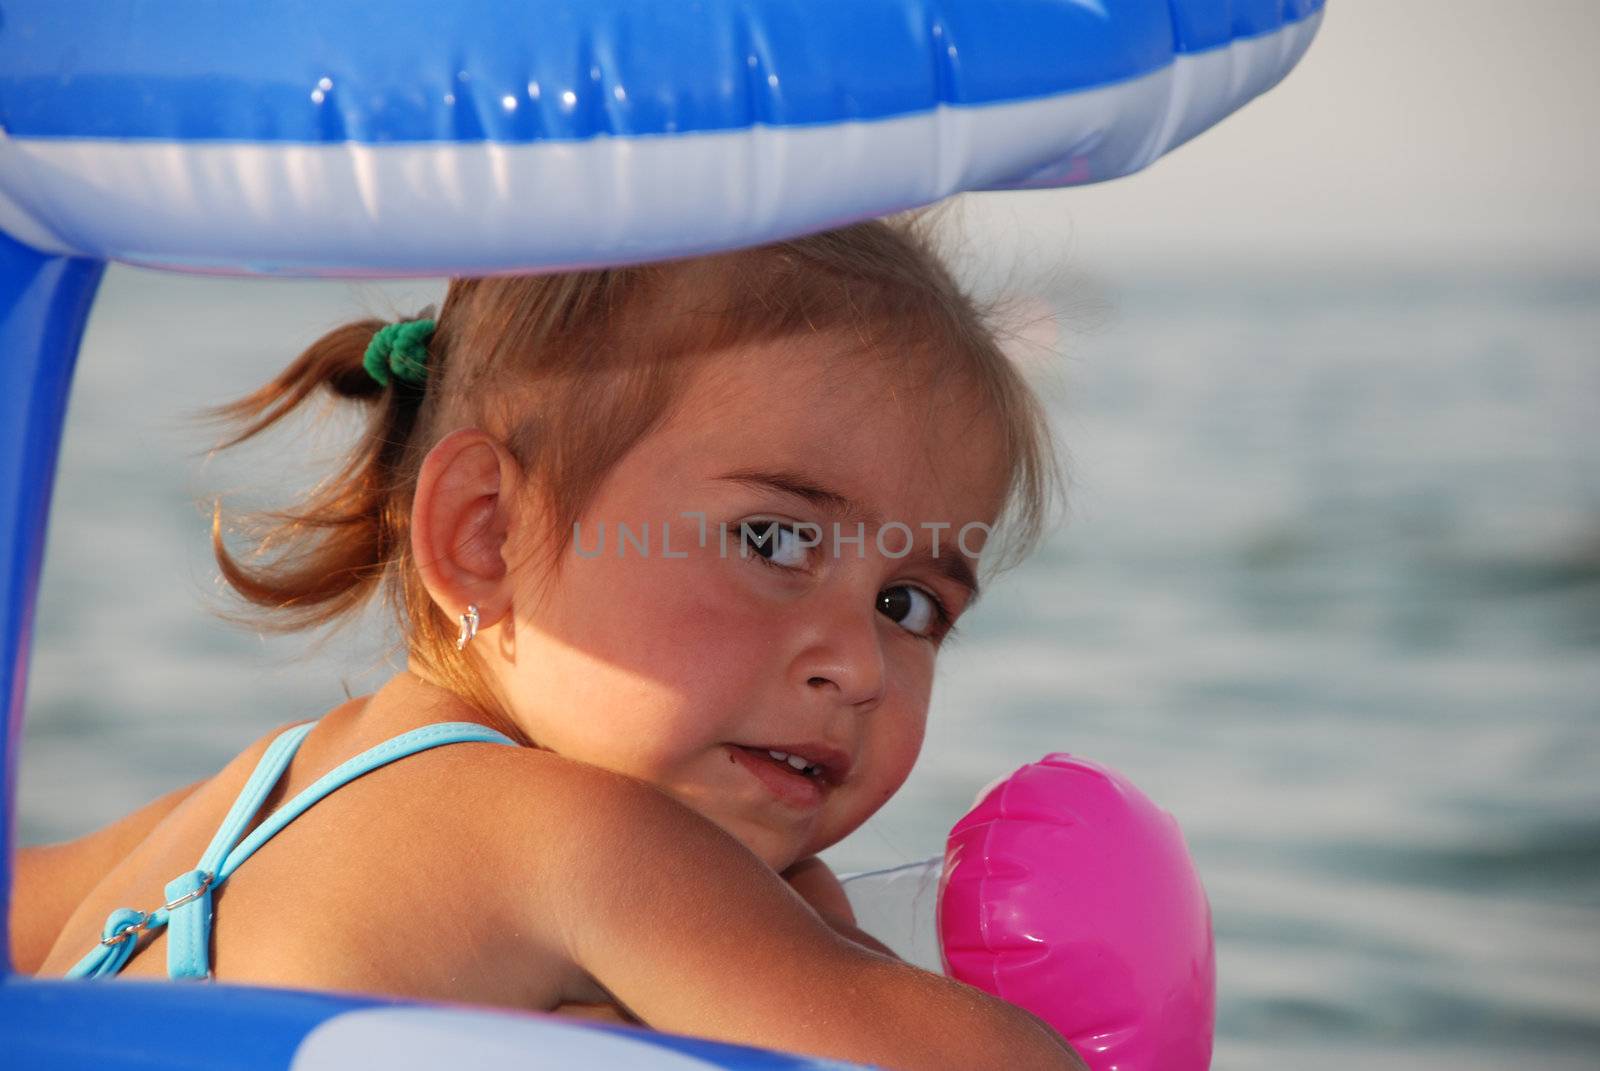 On the sea. The girl floats on an inflatable circle